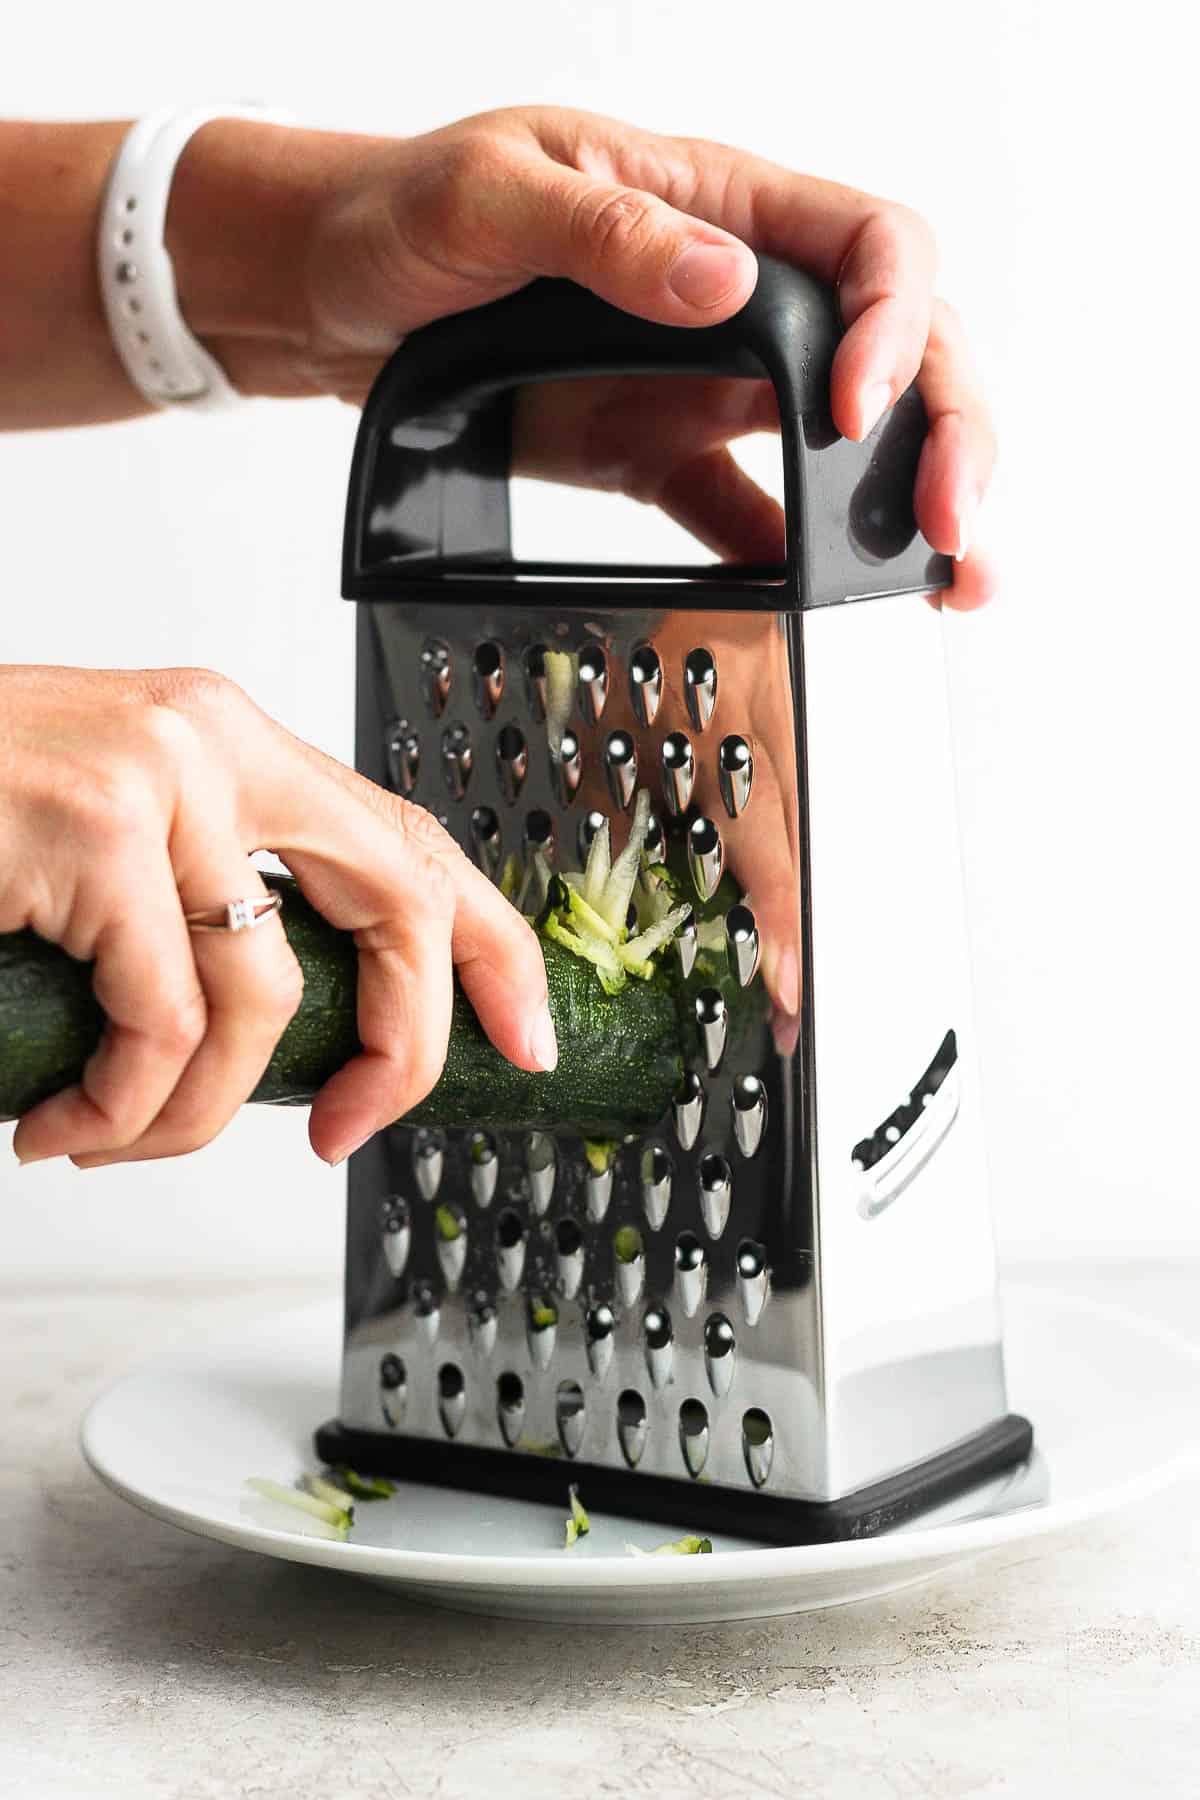 Zucchini being grated on a box grater over a white plate.